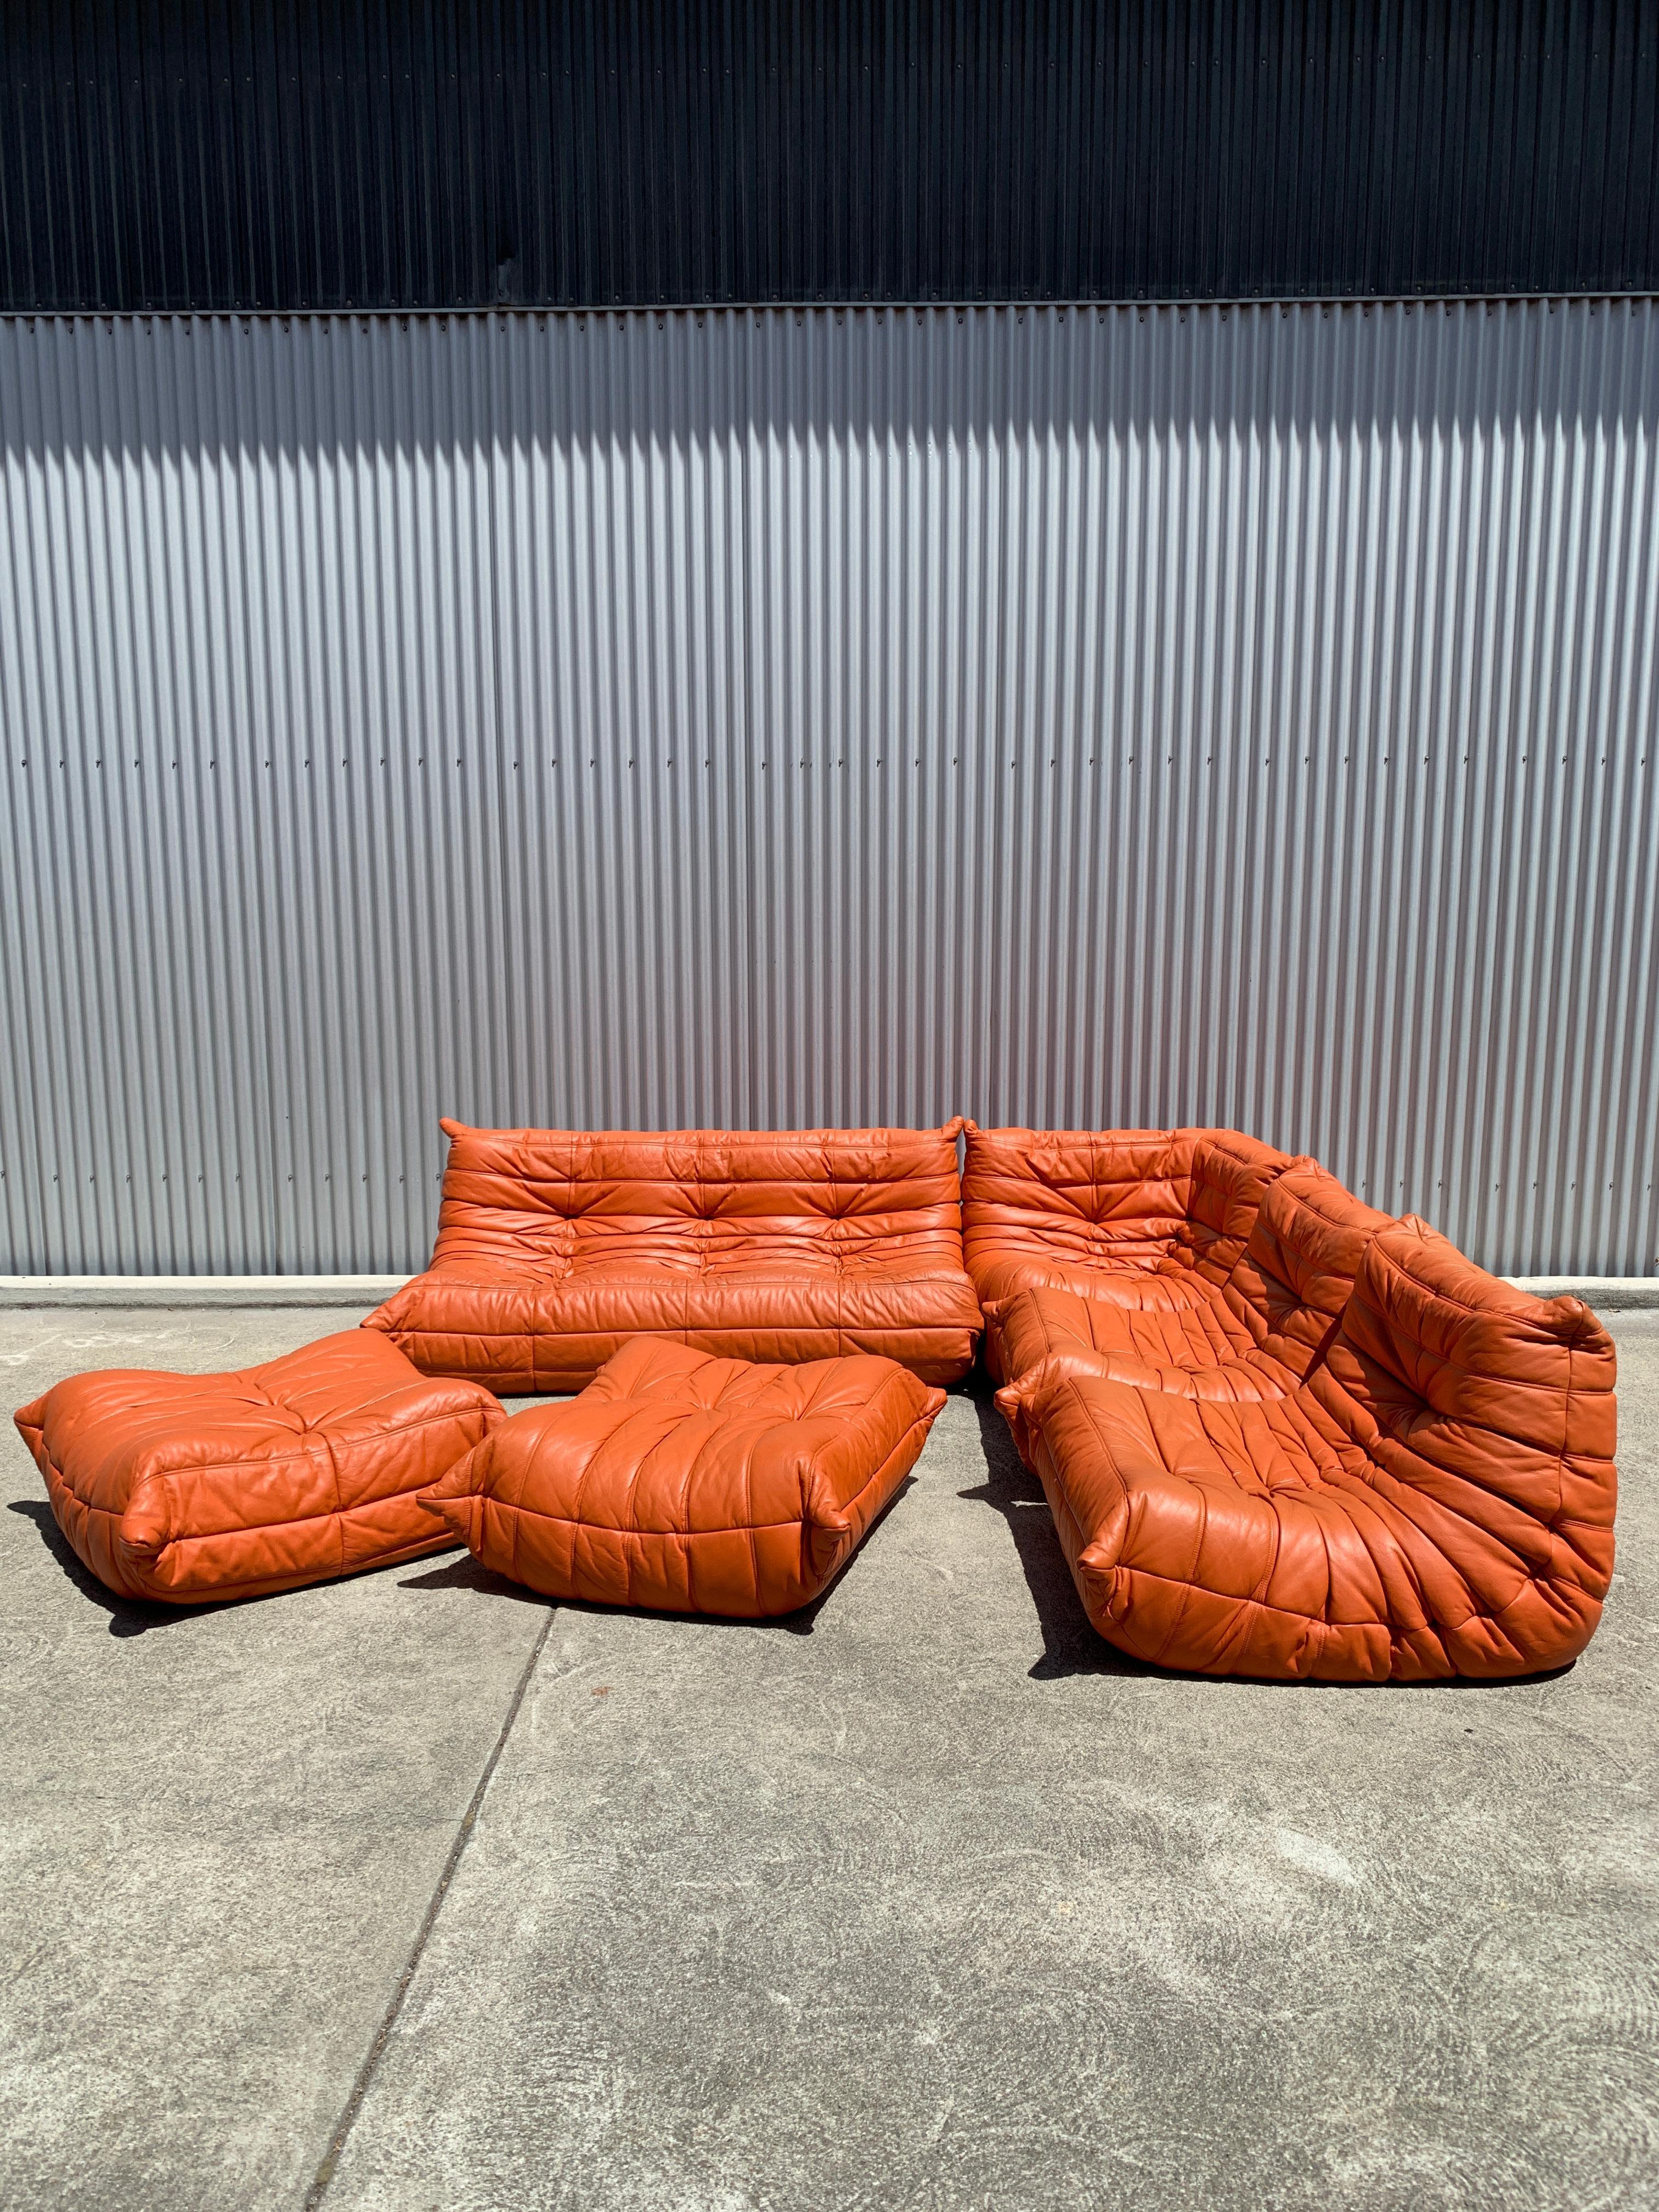 Beautiful vintage umber leather Michel Ducaroy Togo sectional by Linge Roset. Set of six pieces including two seat sofa, two armless chairs, corner, and two ottomans. Excellent overall condition with some mild finish crackling and chaffing on the